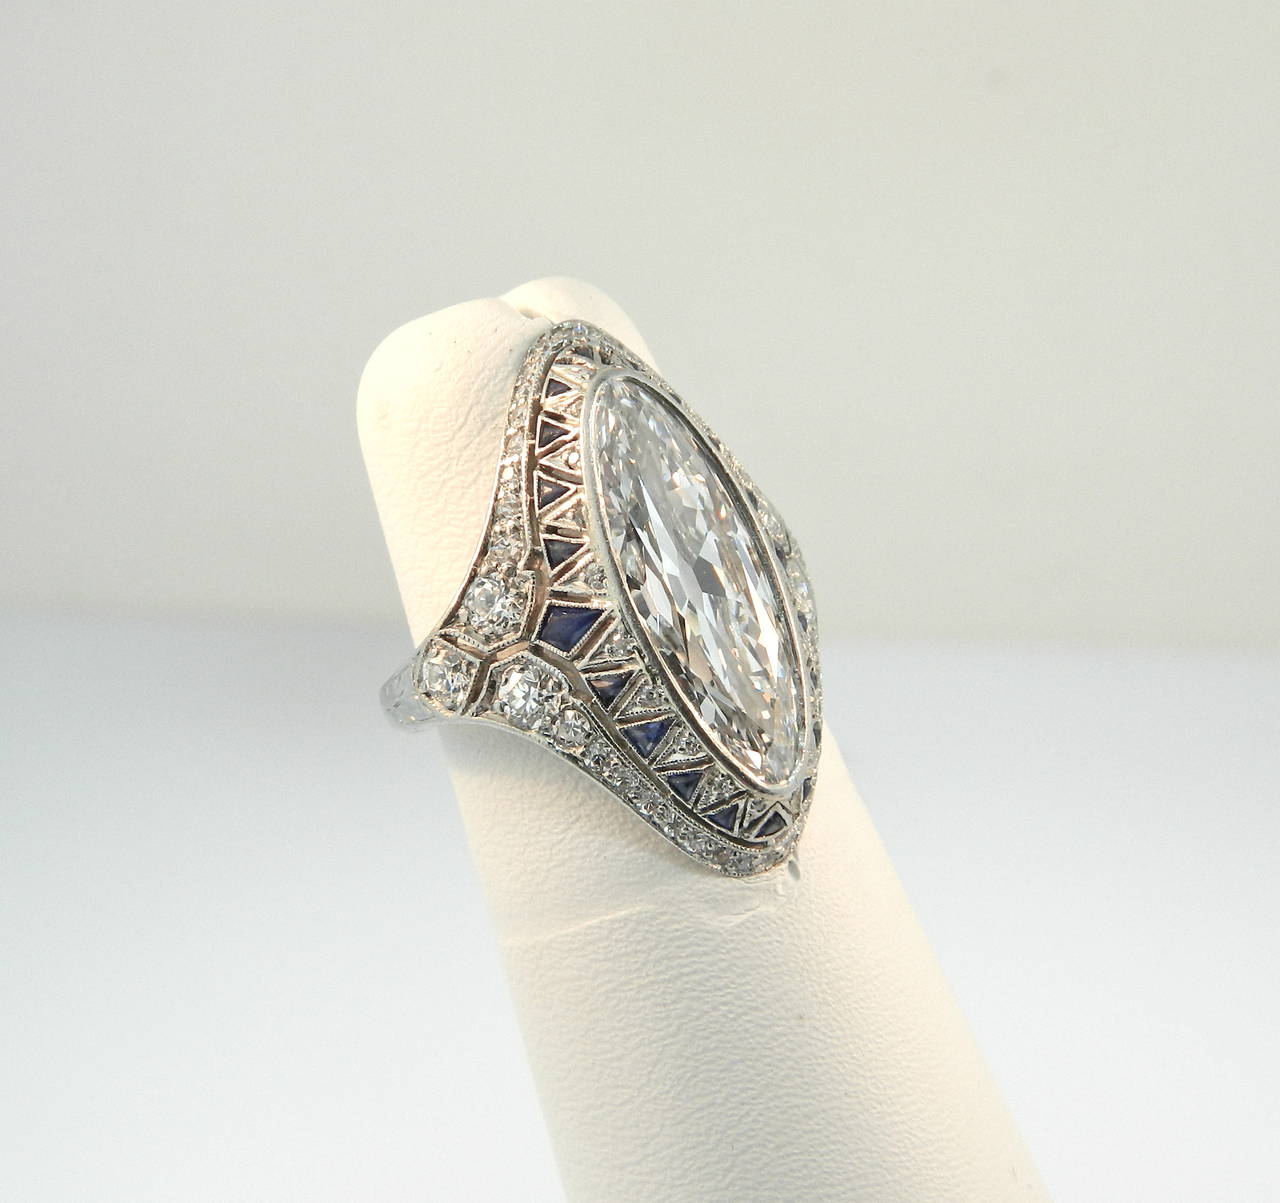 A superb Art Deco Diamond, Sapphire and Platinum ring, featuring a fabulous 3ct (approx) antique oval/marquise cut diamond.  G+ in color and VVS2+ in clarity.